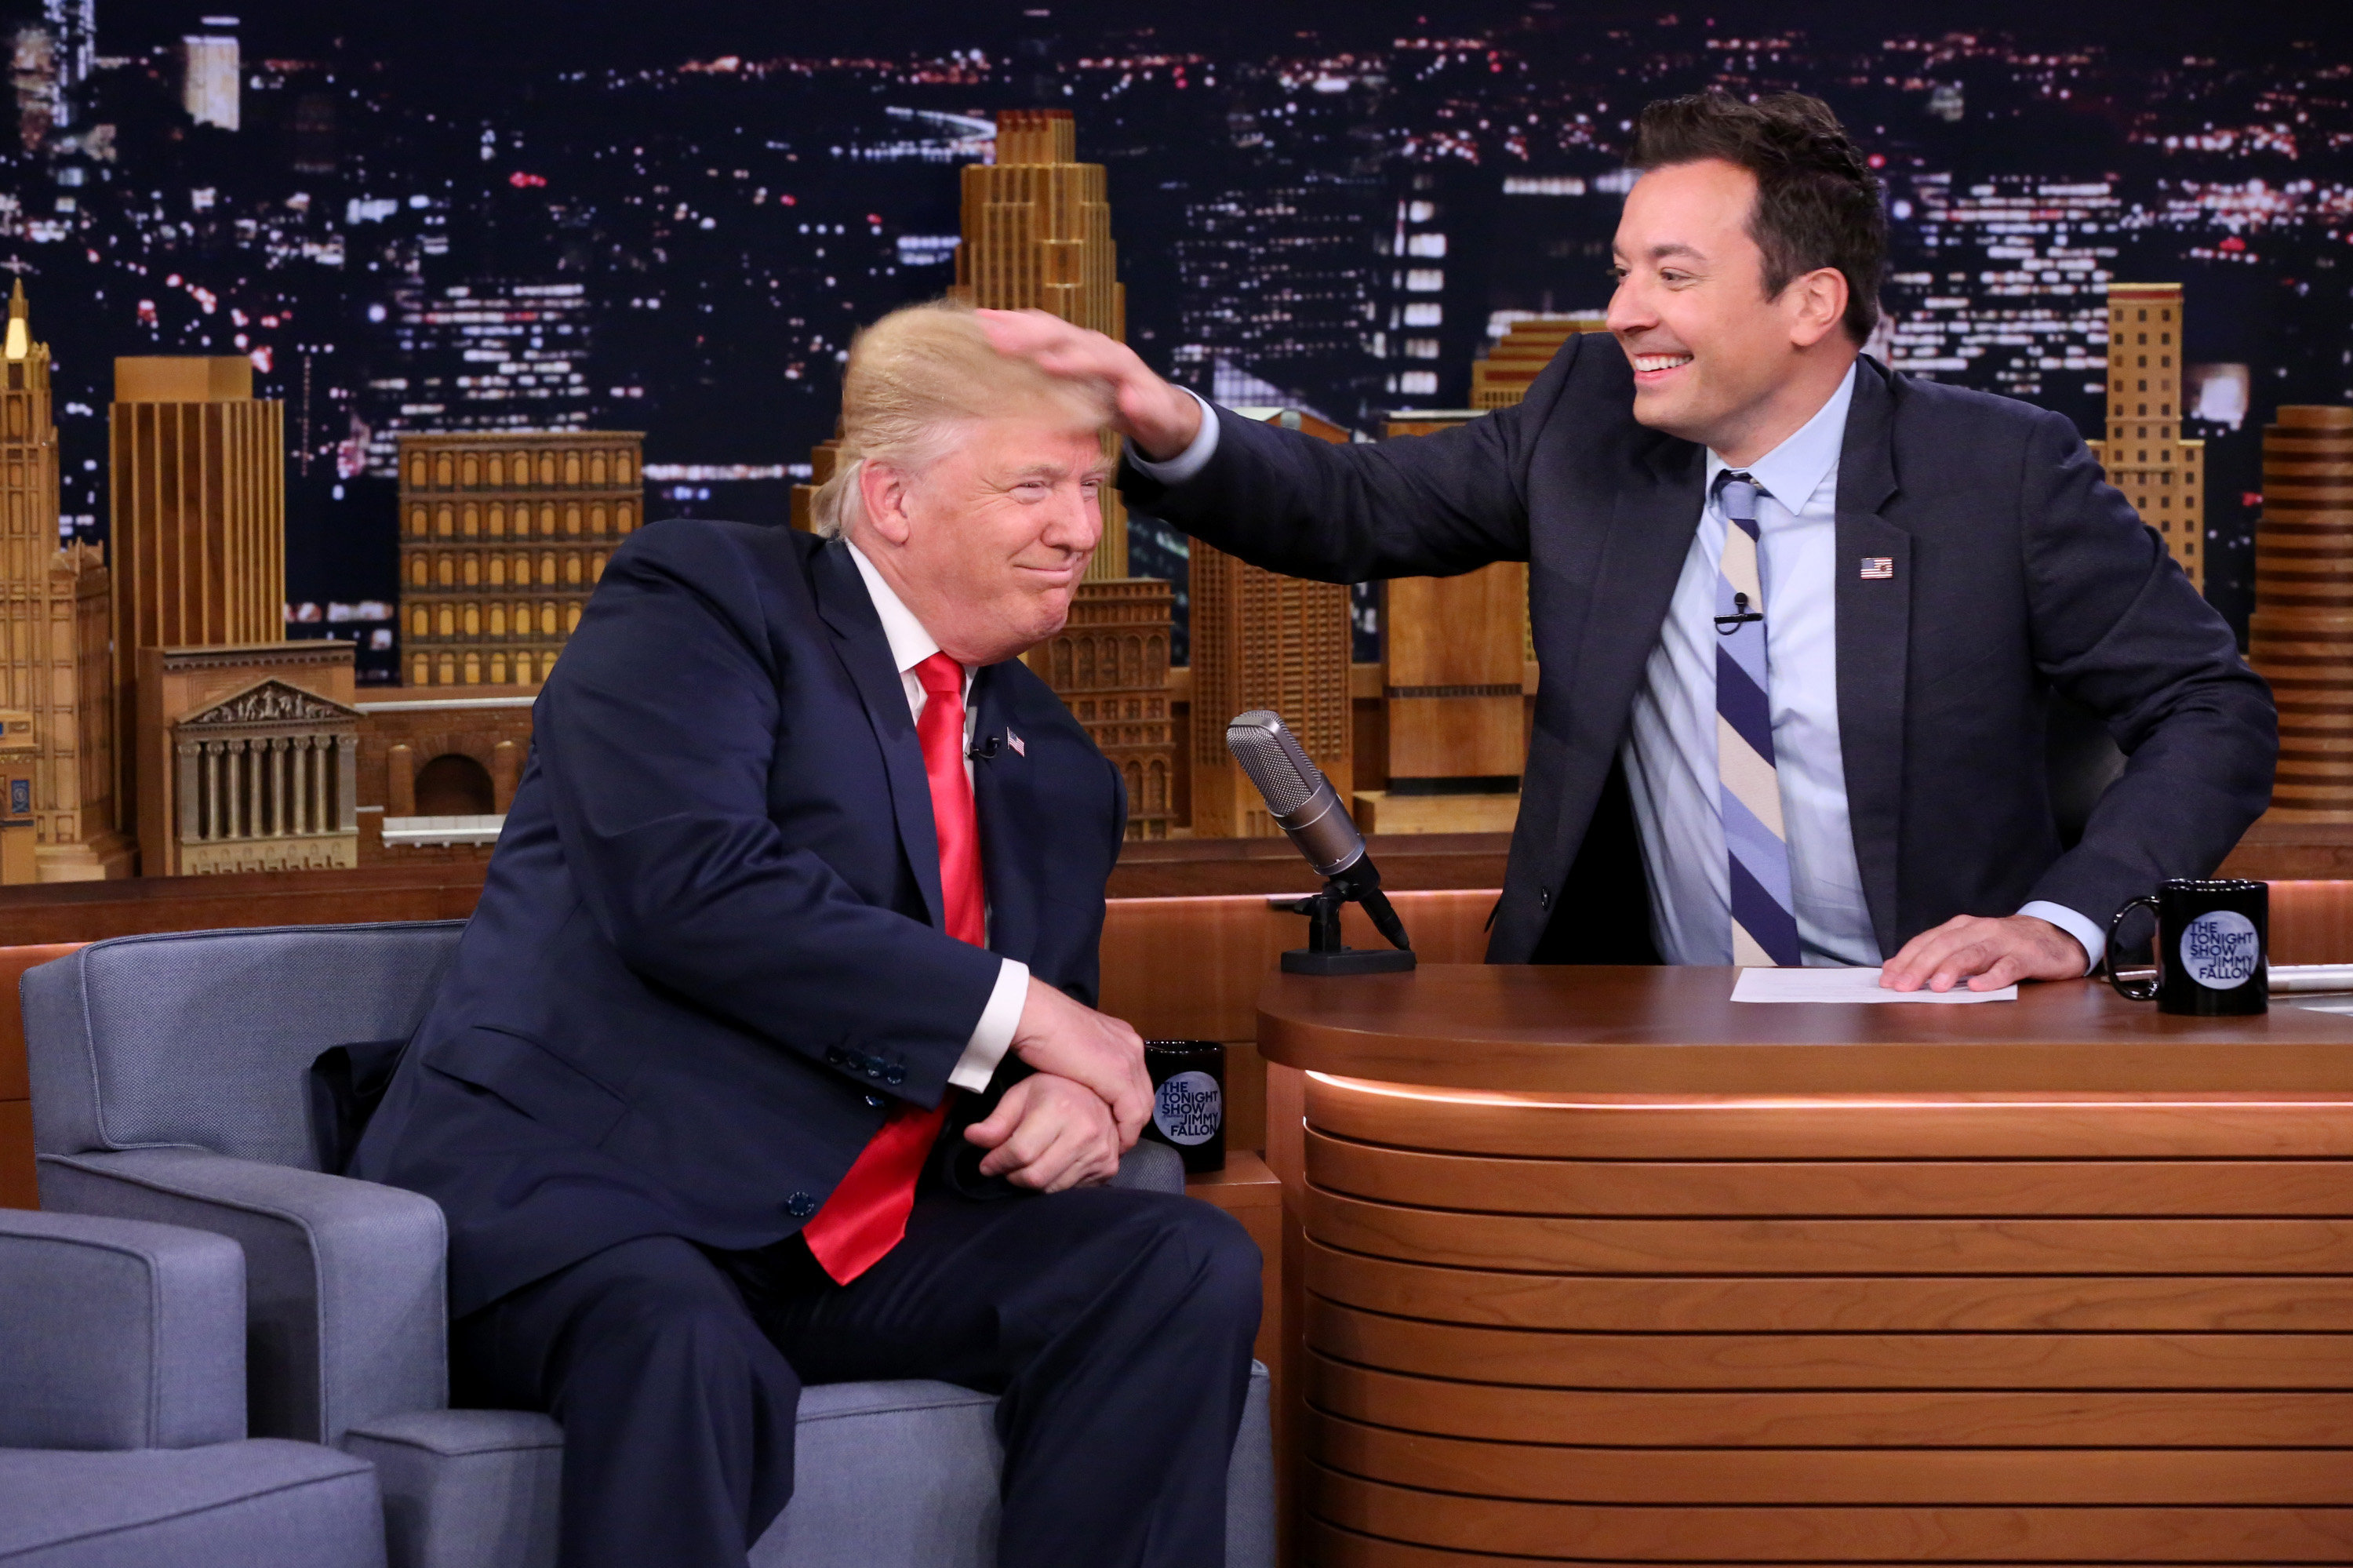 Donald Trump appears with host Jimmy Fallon during a taping of "The Tonight Show Starring Jimmy Fallon" on Sept. 15, 2016. (Andrew Lipovsky—NBC/AP)